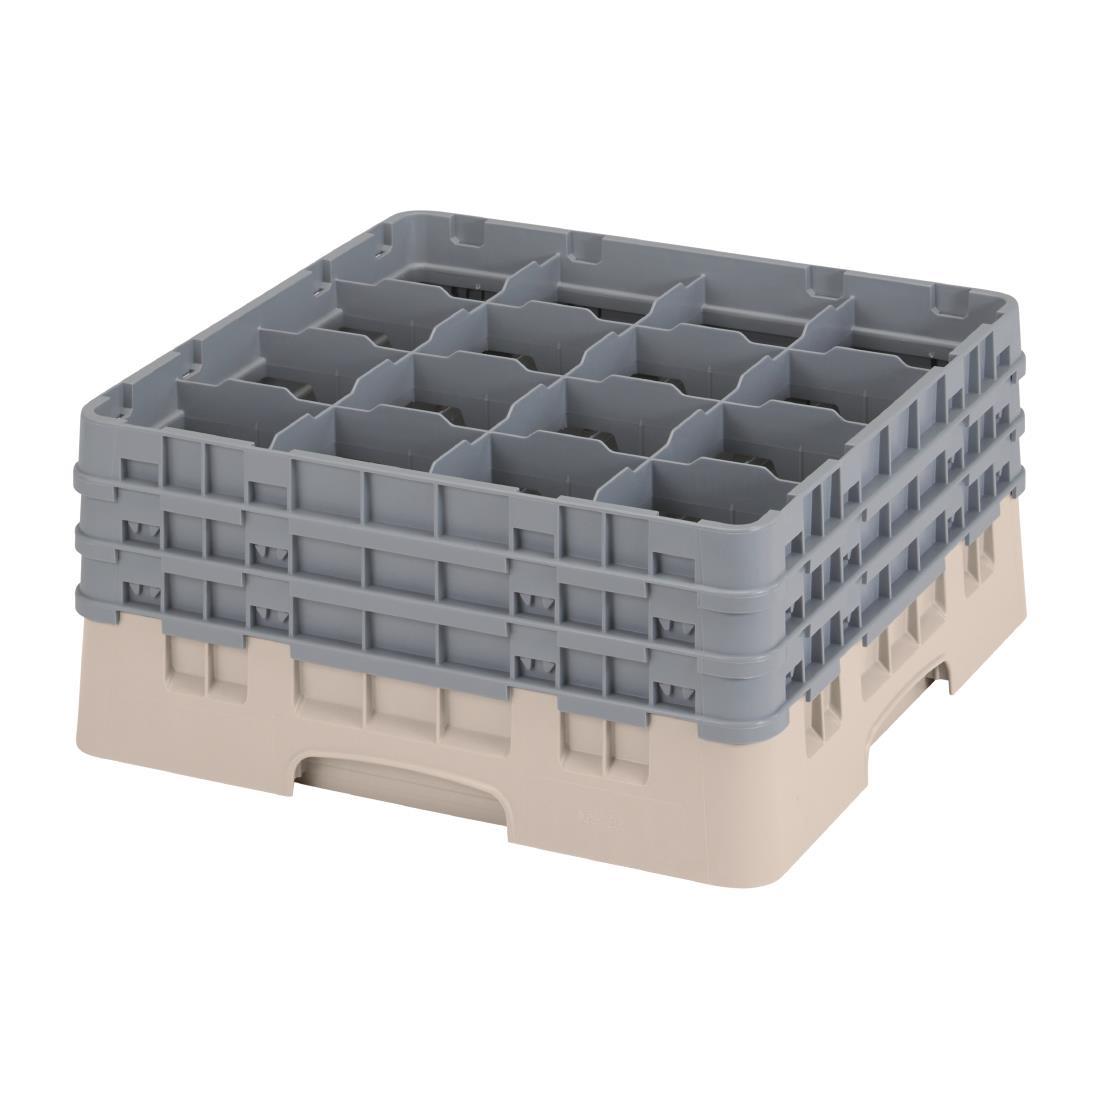 Cambro Camrack Beige 16 Compartments Max Glass Height 196mm - FD065